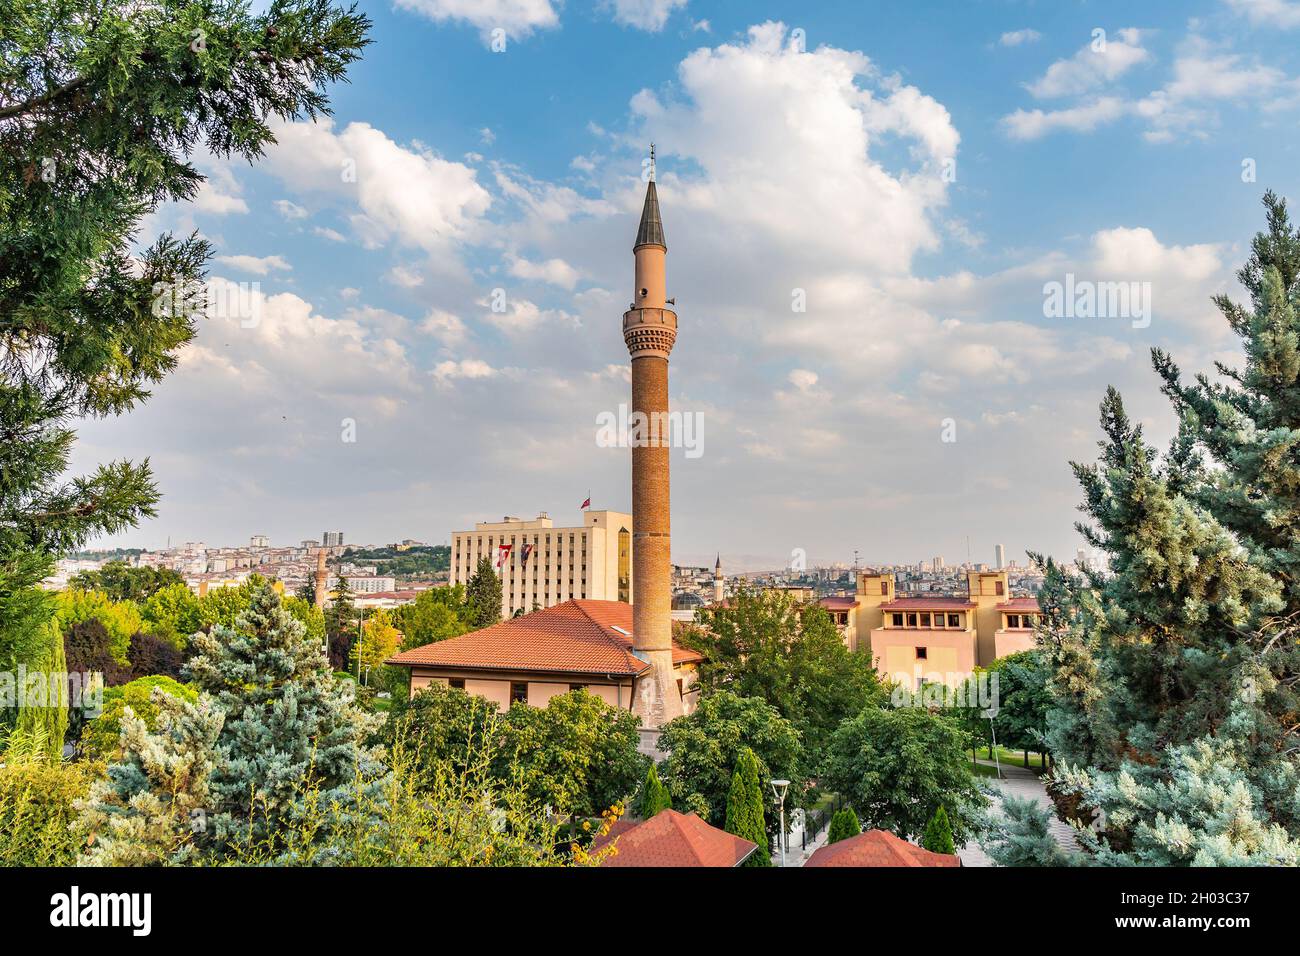 Ankara Haci Musa Mosque Breathtaking Picturesque View of Minaret on a Blue Sky Day in Summer Stock Photo